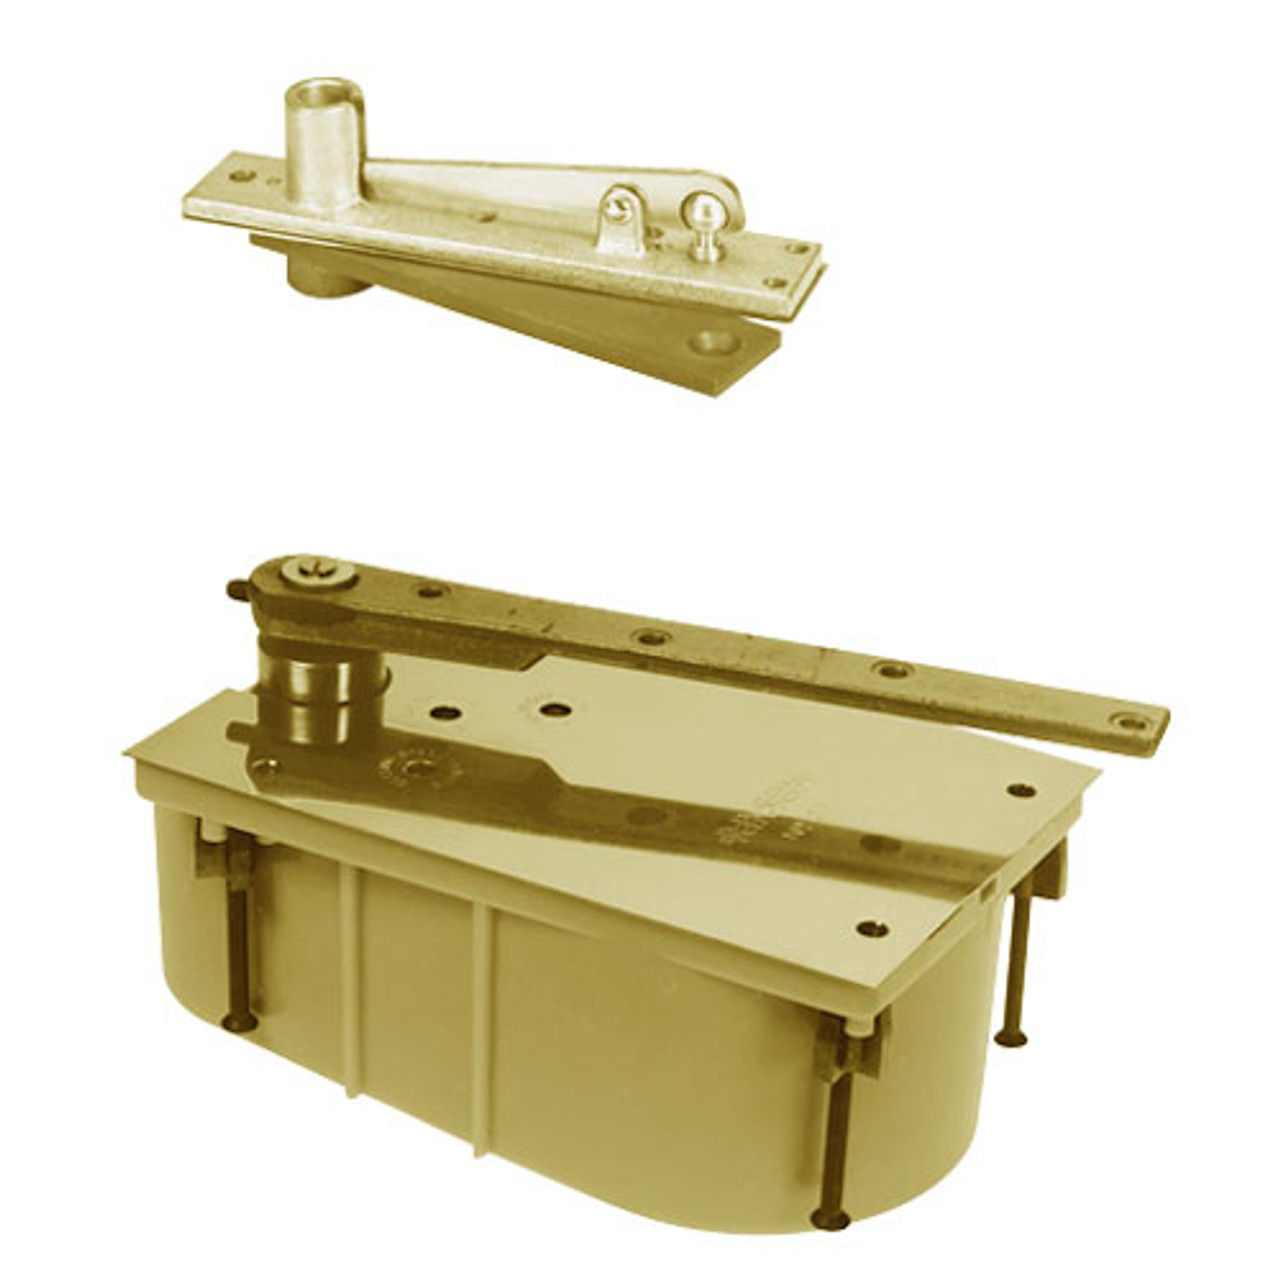 28-105S-554-CWF-RH-606 Rixson 28 Series Heavy Duty Single Acting Center Hung Floor Closer with Concealed Arm in Satin Brass Finish